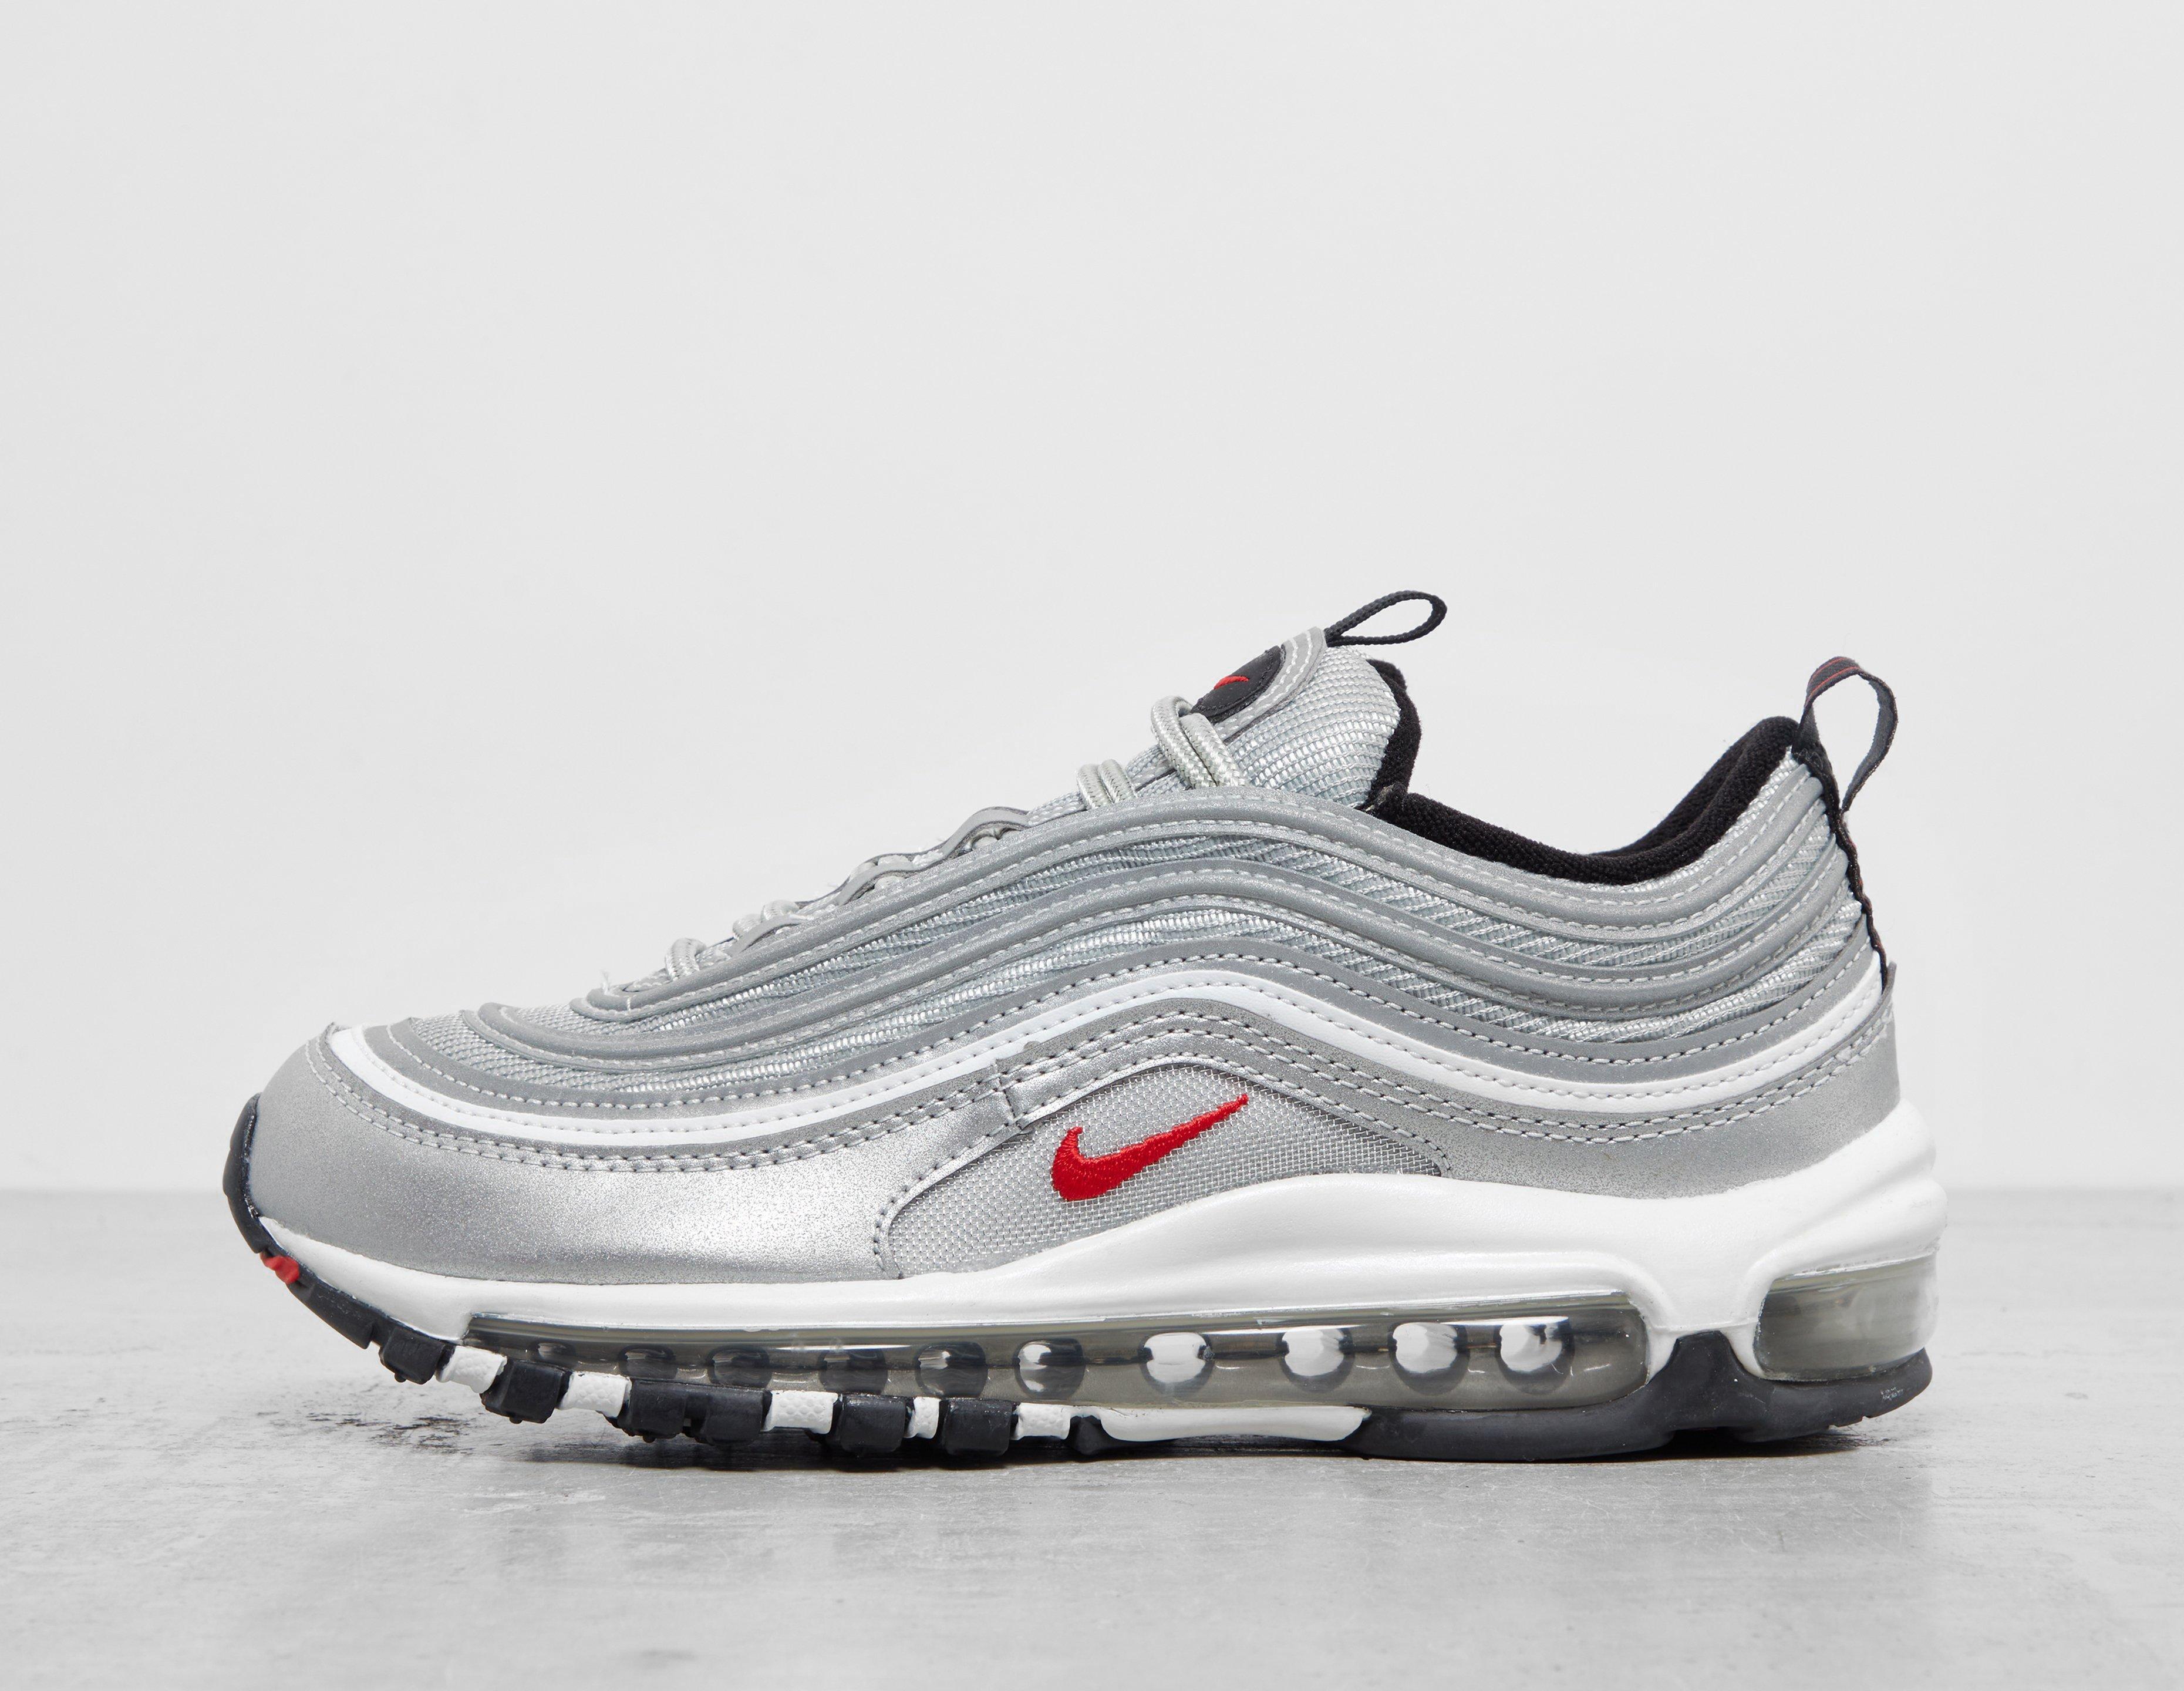 Nike iD Lets You Control the New Air Max 97 Colorway With Its